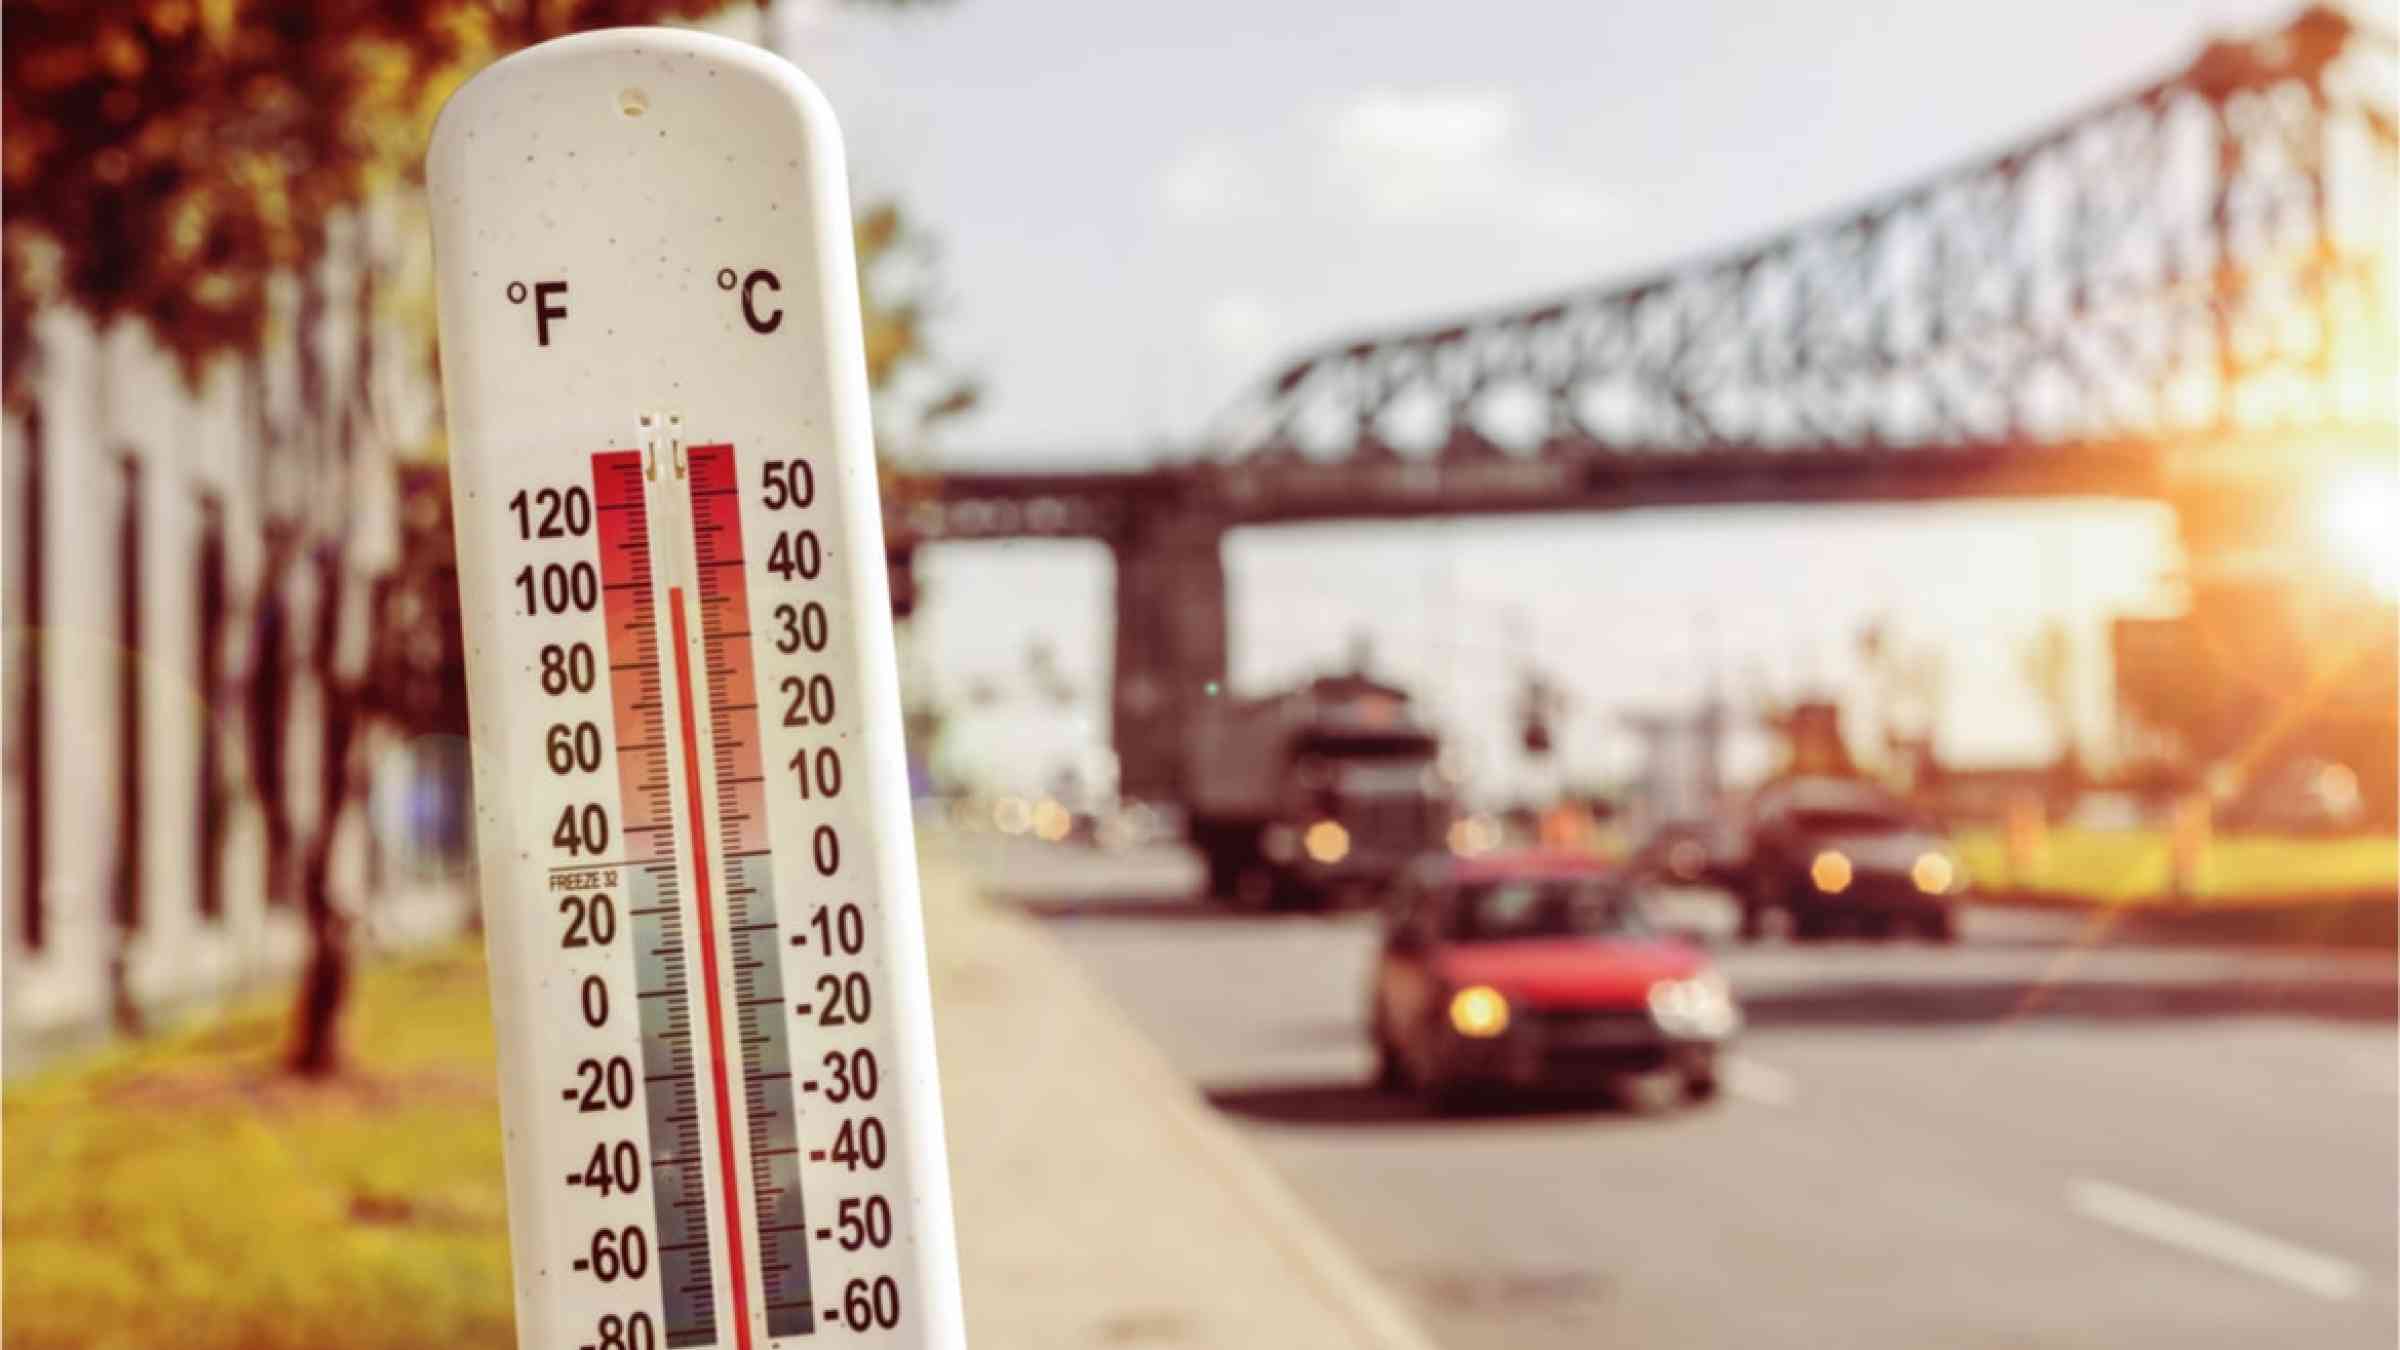 A thermometer showing high temperatures. A city is blurred in the background.